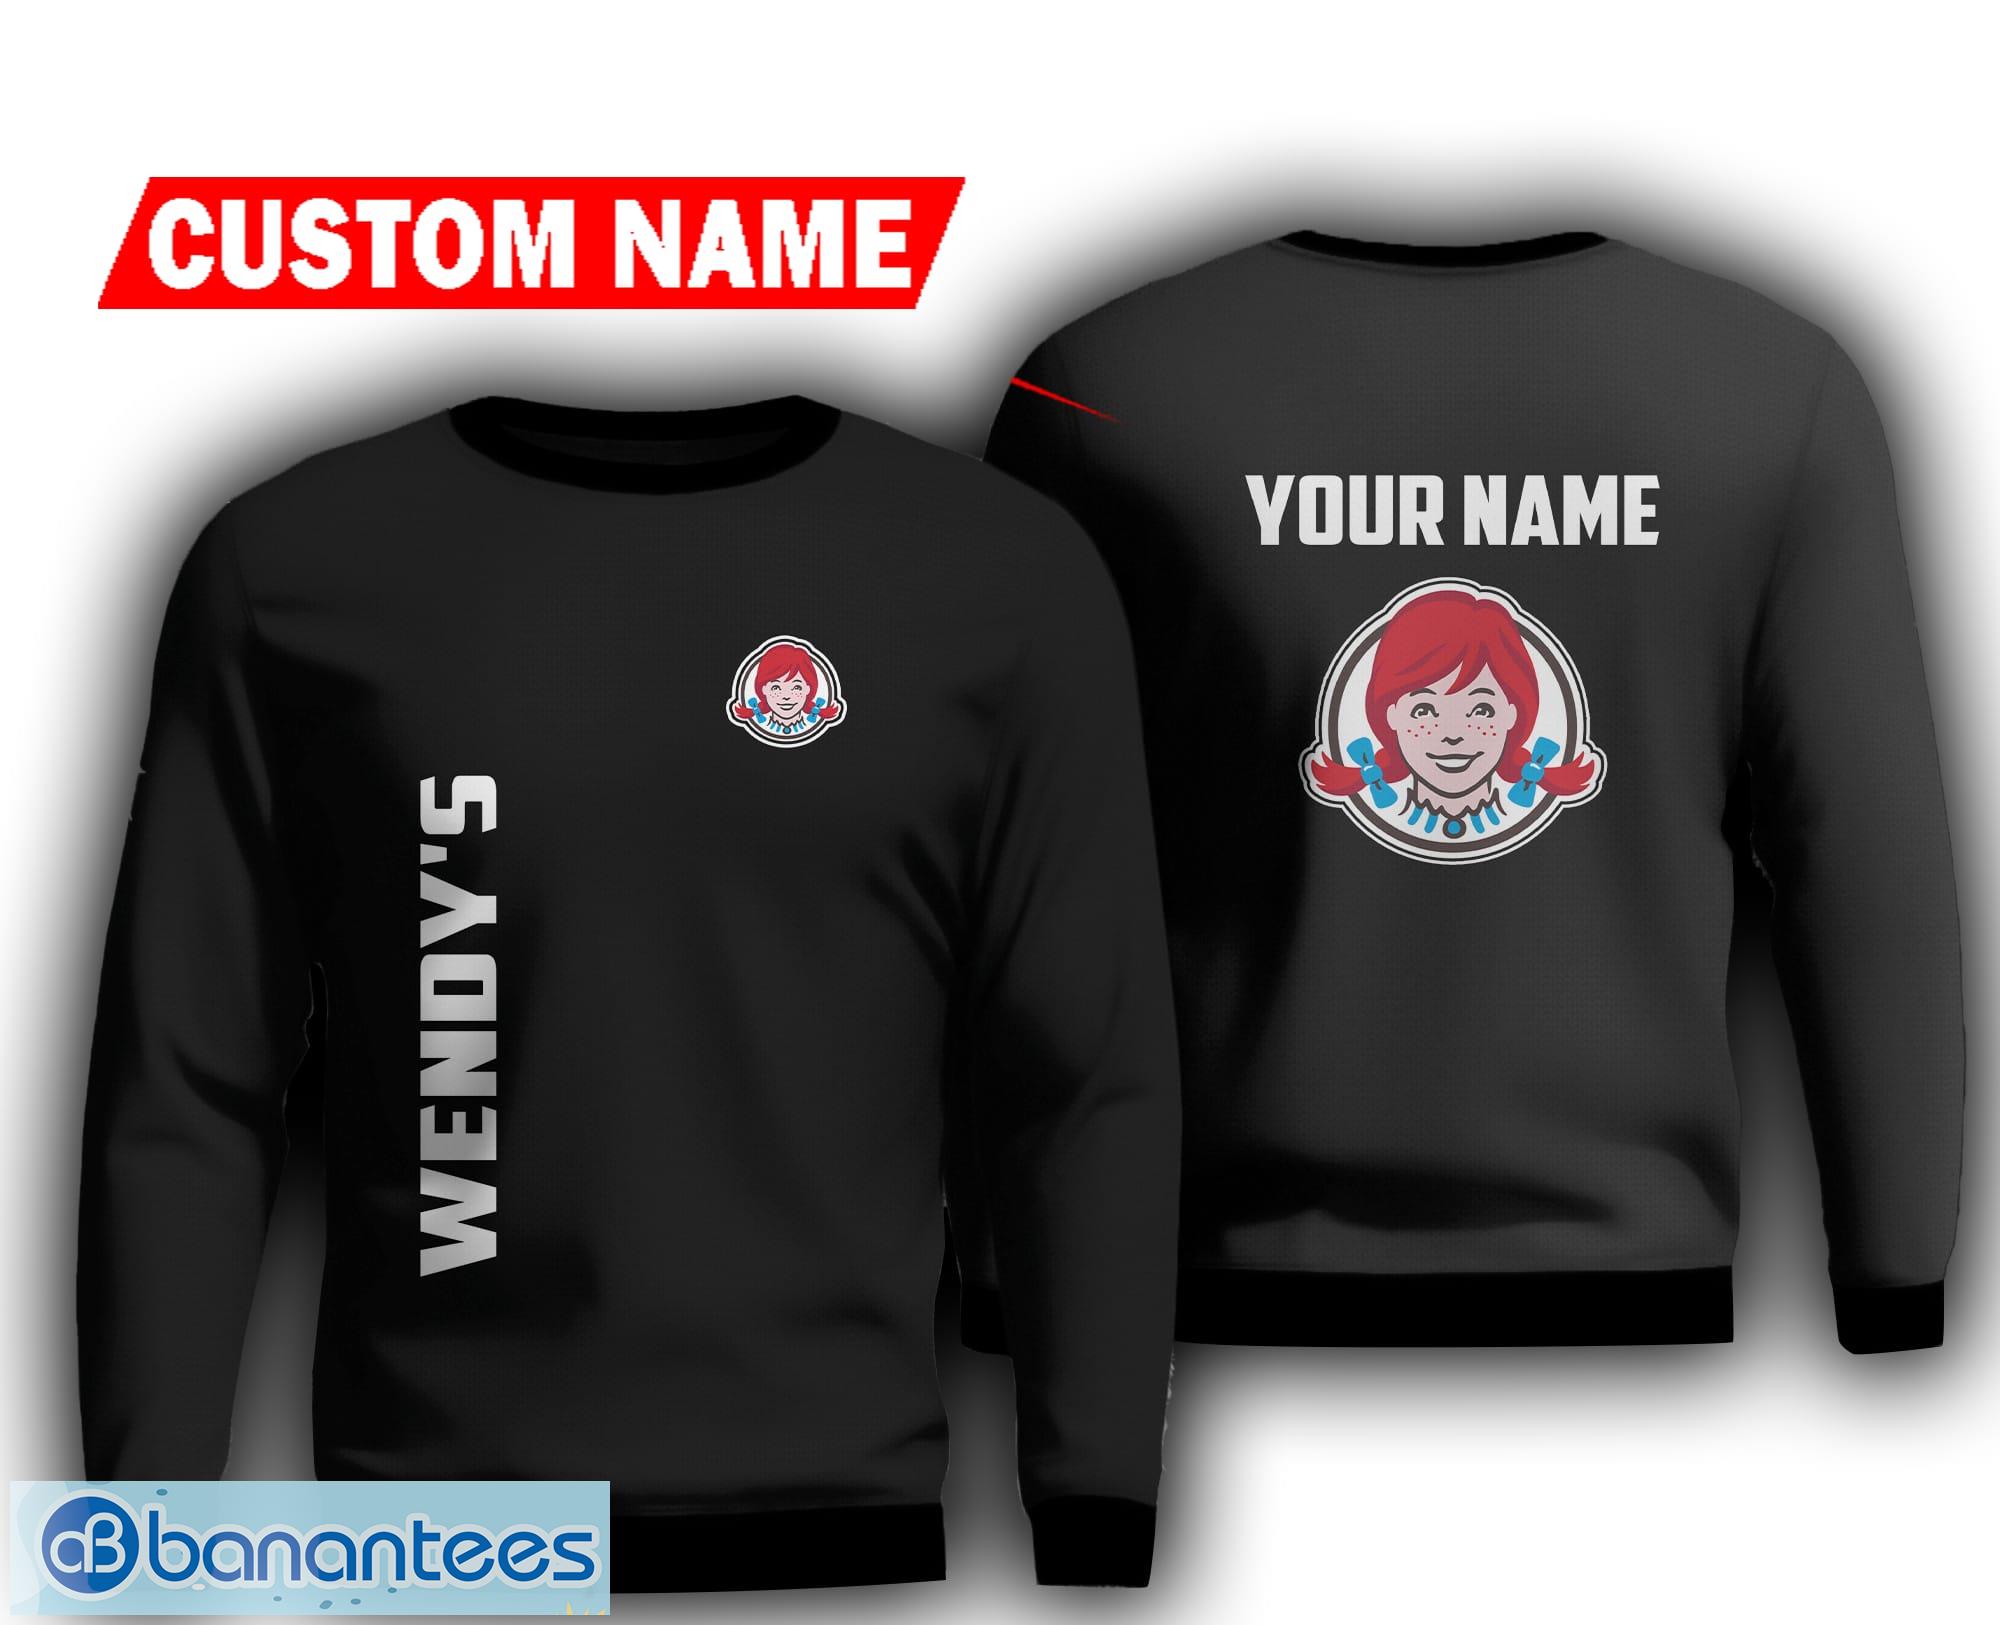 wendy's Brand Light Ugly Sweater size 3D Christmas Sweatshirt Custom Name - wendy's Brand Light Ugly Sweater size 3D Christmas Sweatshirt Custom Name